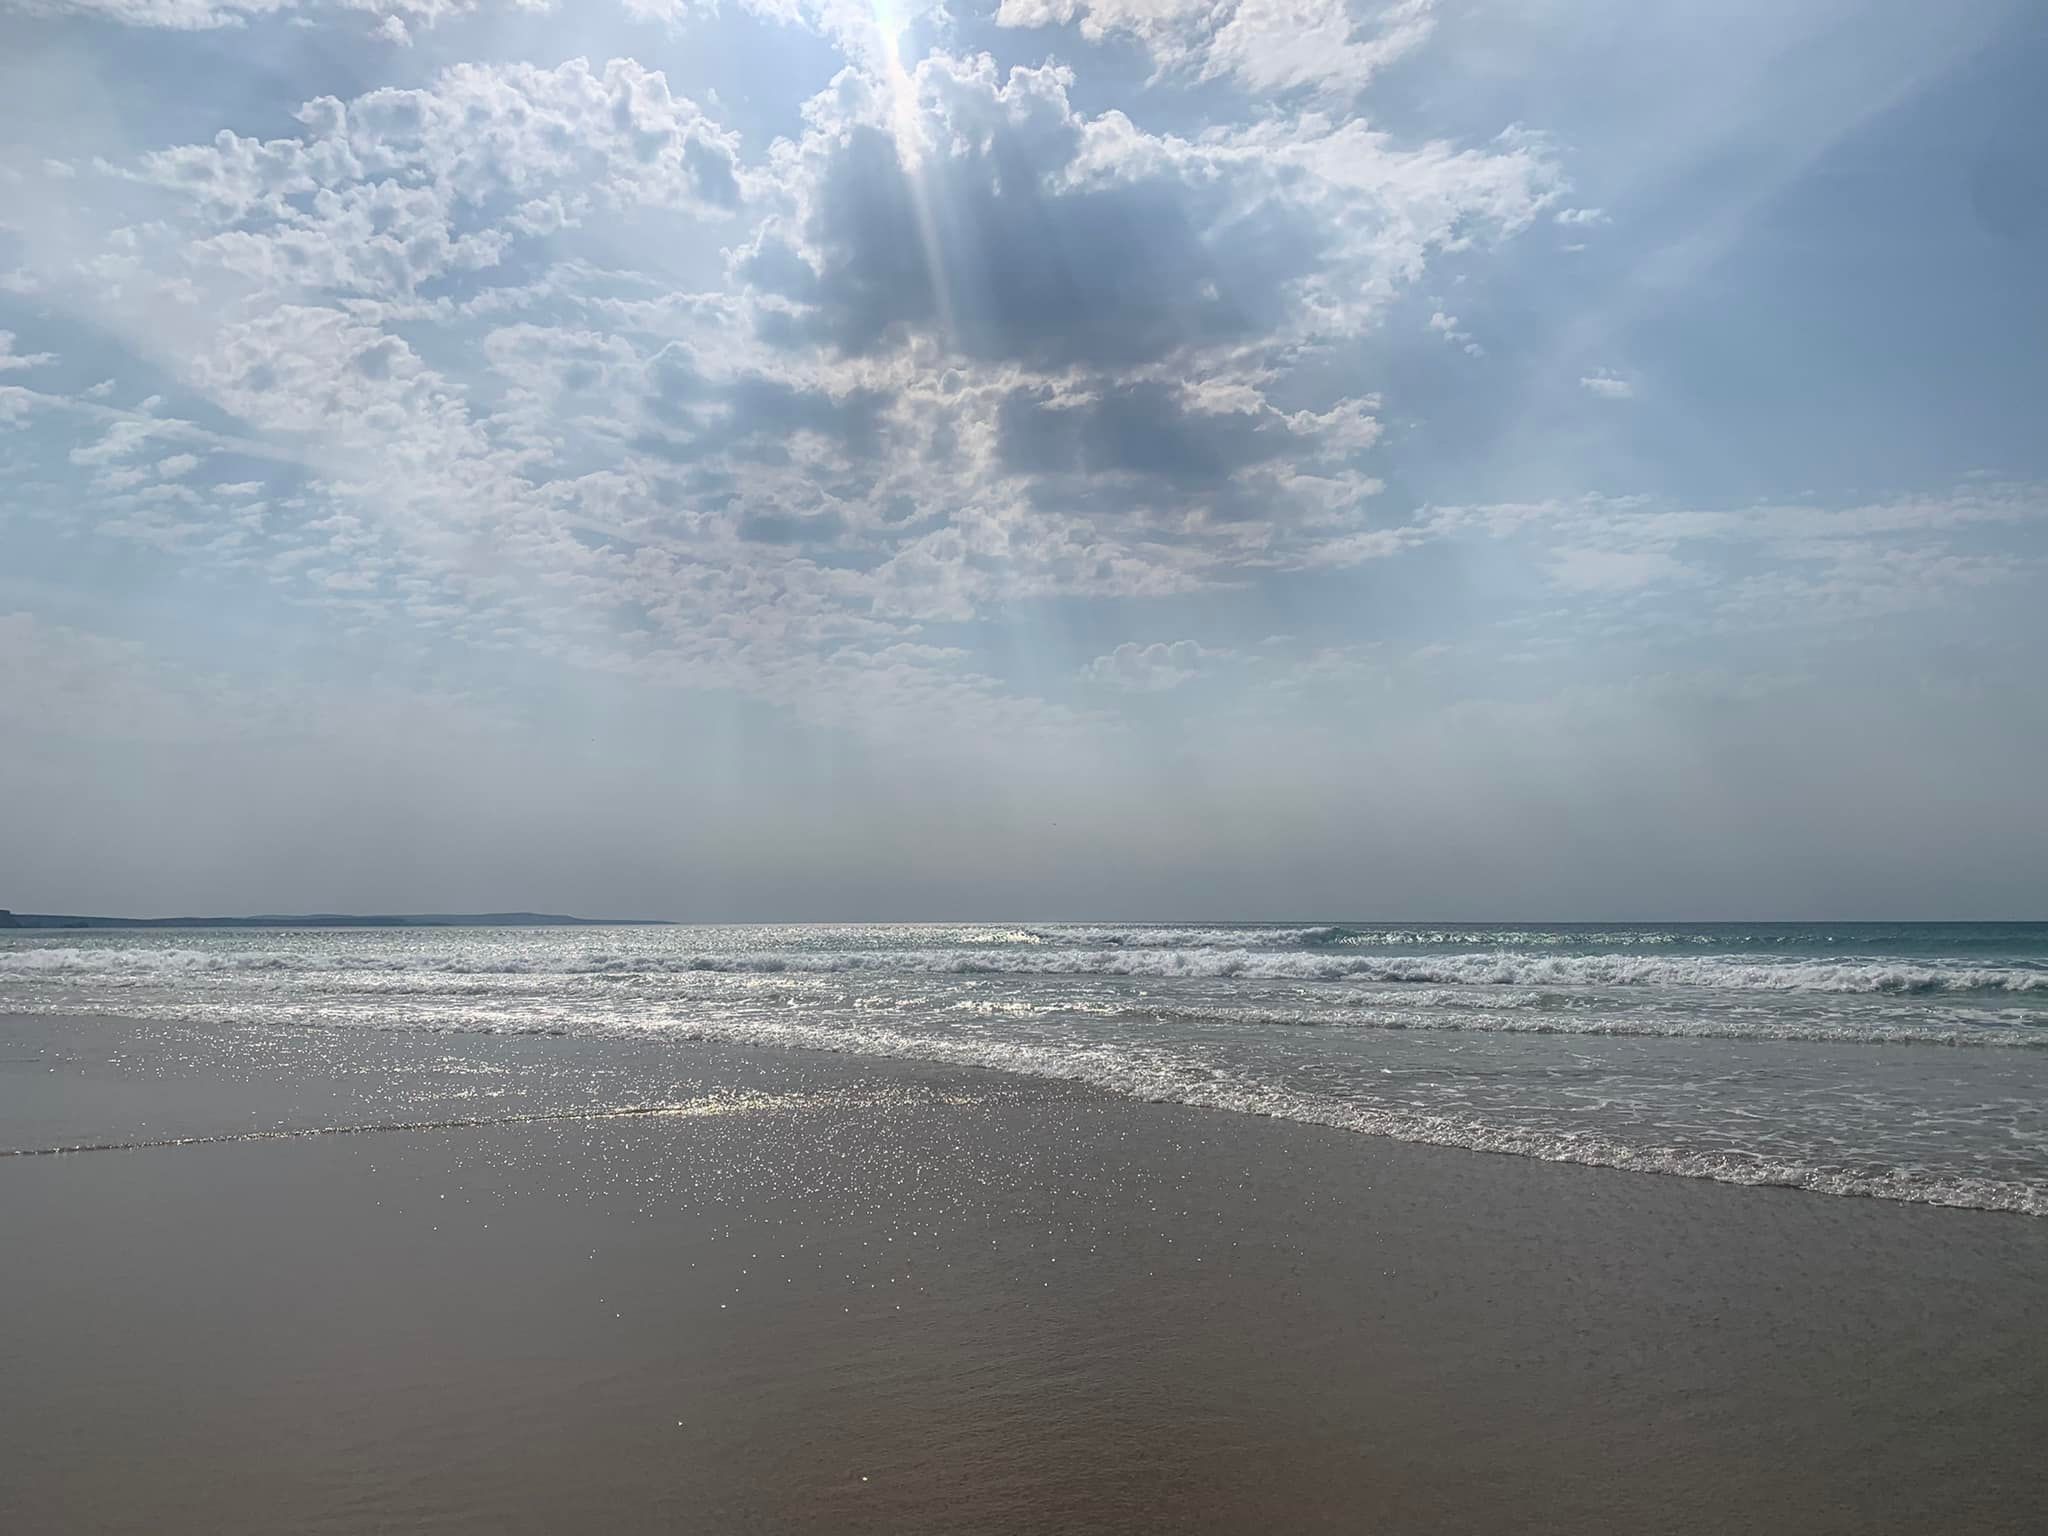 A ray of sunshine between the clouds and onto the beach. By Natalie Buswell